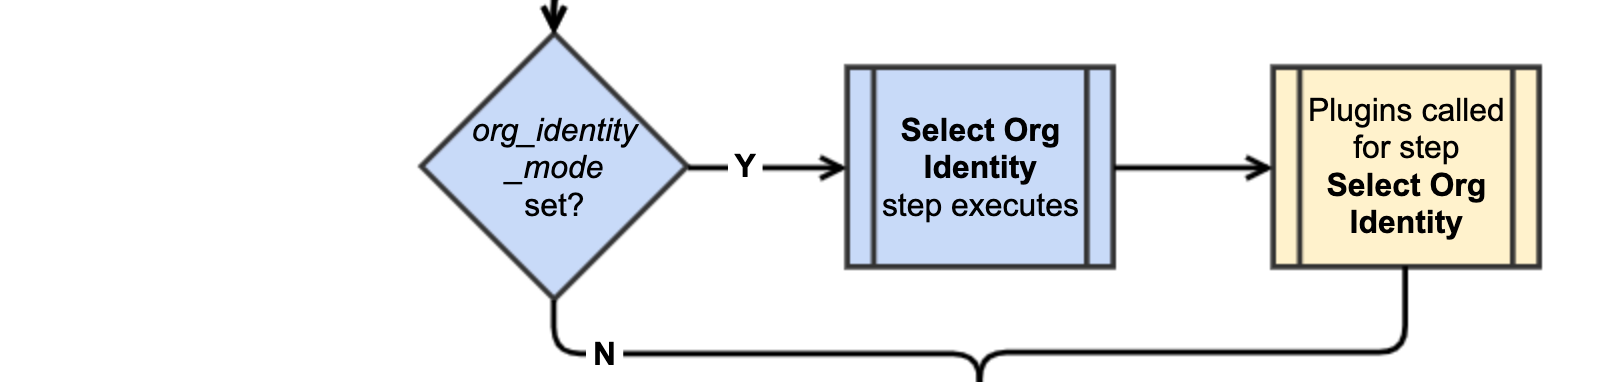 Step 3. Select Org Identity Flow diagram